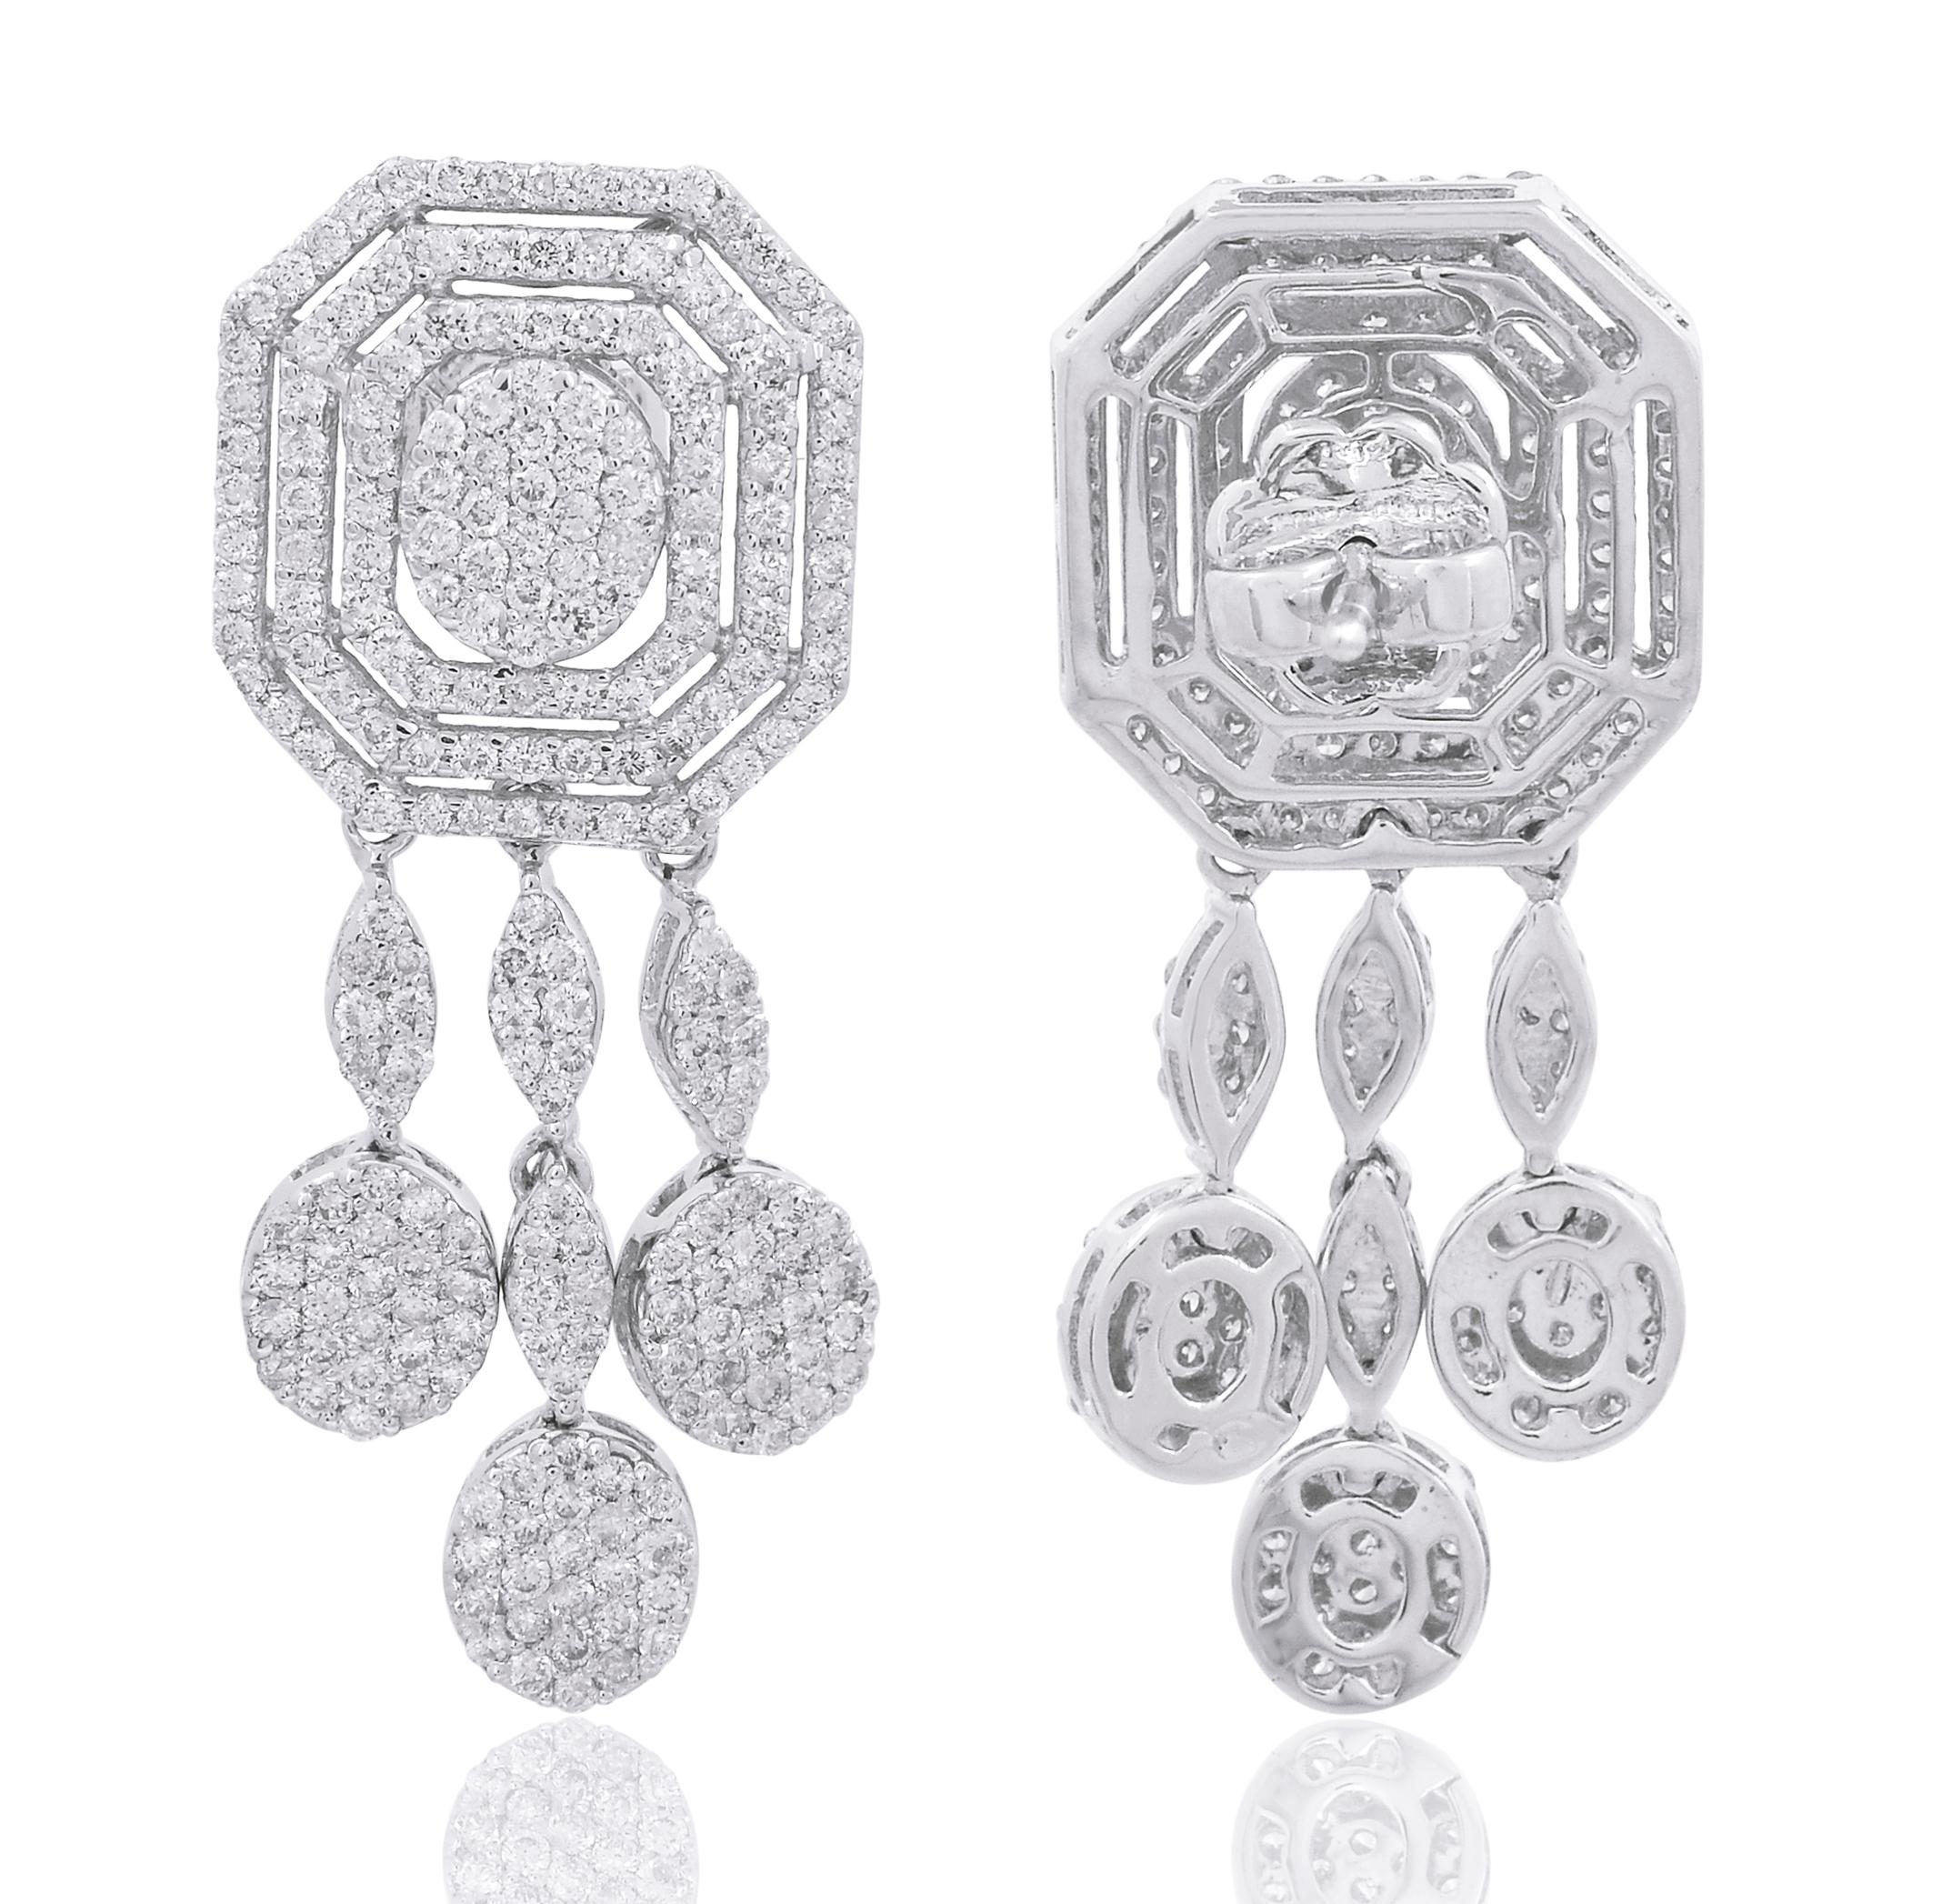 Item Code :- CN-25442
Gross Wt. :- 11.25 gm
18k White Gold Wt. :- 10.75 gm
Diamond Wt. :- 2.50 Ct. ( AVERAGE DIAMOND CLARITY SI1-SI2 & COLOR H-I )
Earrings Size :- 34.87 x 14.50 x 5.27 mm approx.
✦ Sizing
.....................
We can adjust most